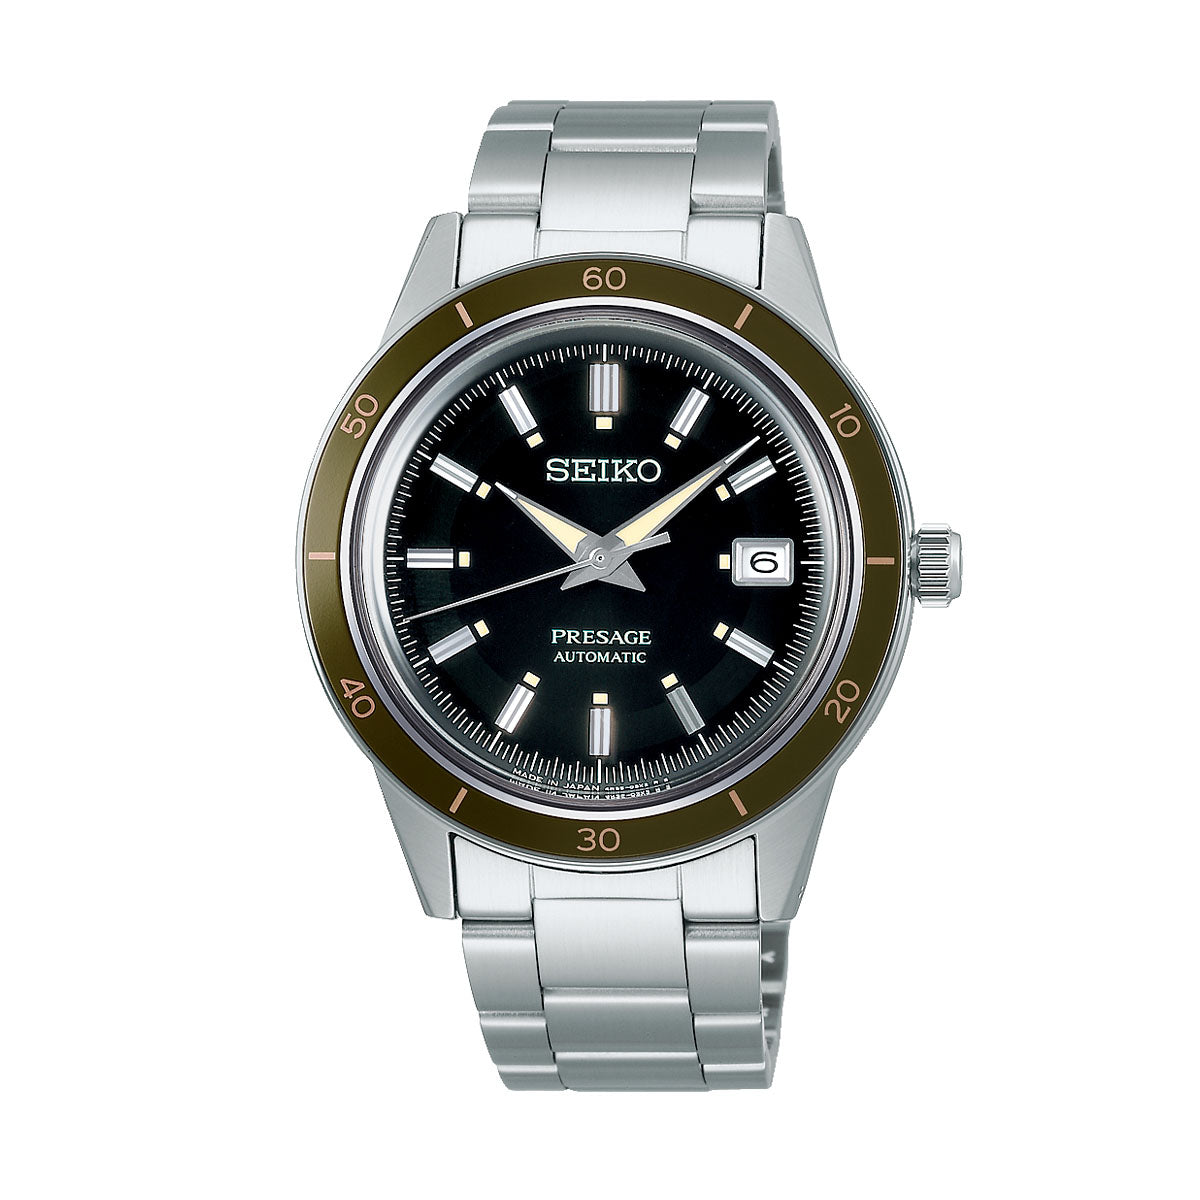 Seiko Presage Automatic With Manual Winding 40.8mm Watch